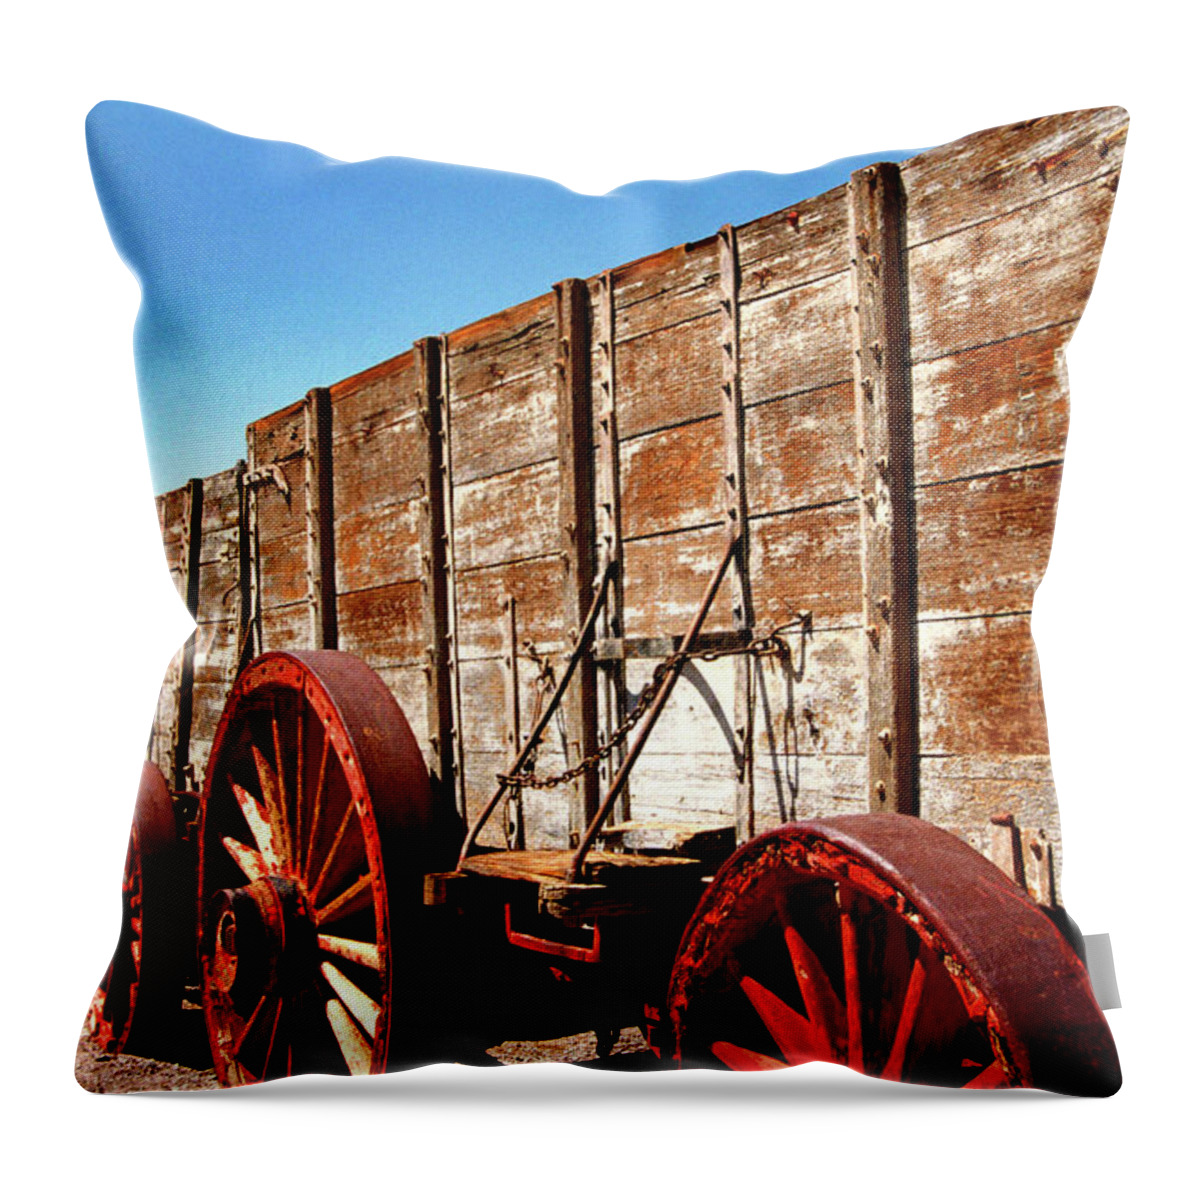 Death Valley Throw Pillow featuring the photograph Death Valley Borax Wagons by Paul W Faust - Impressions of Light